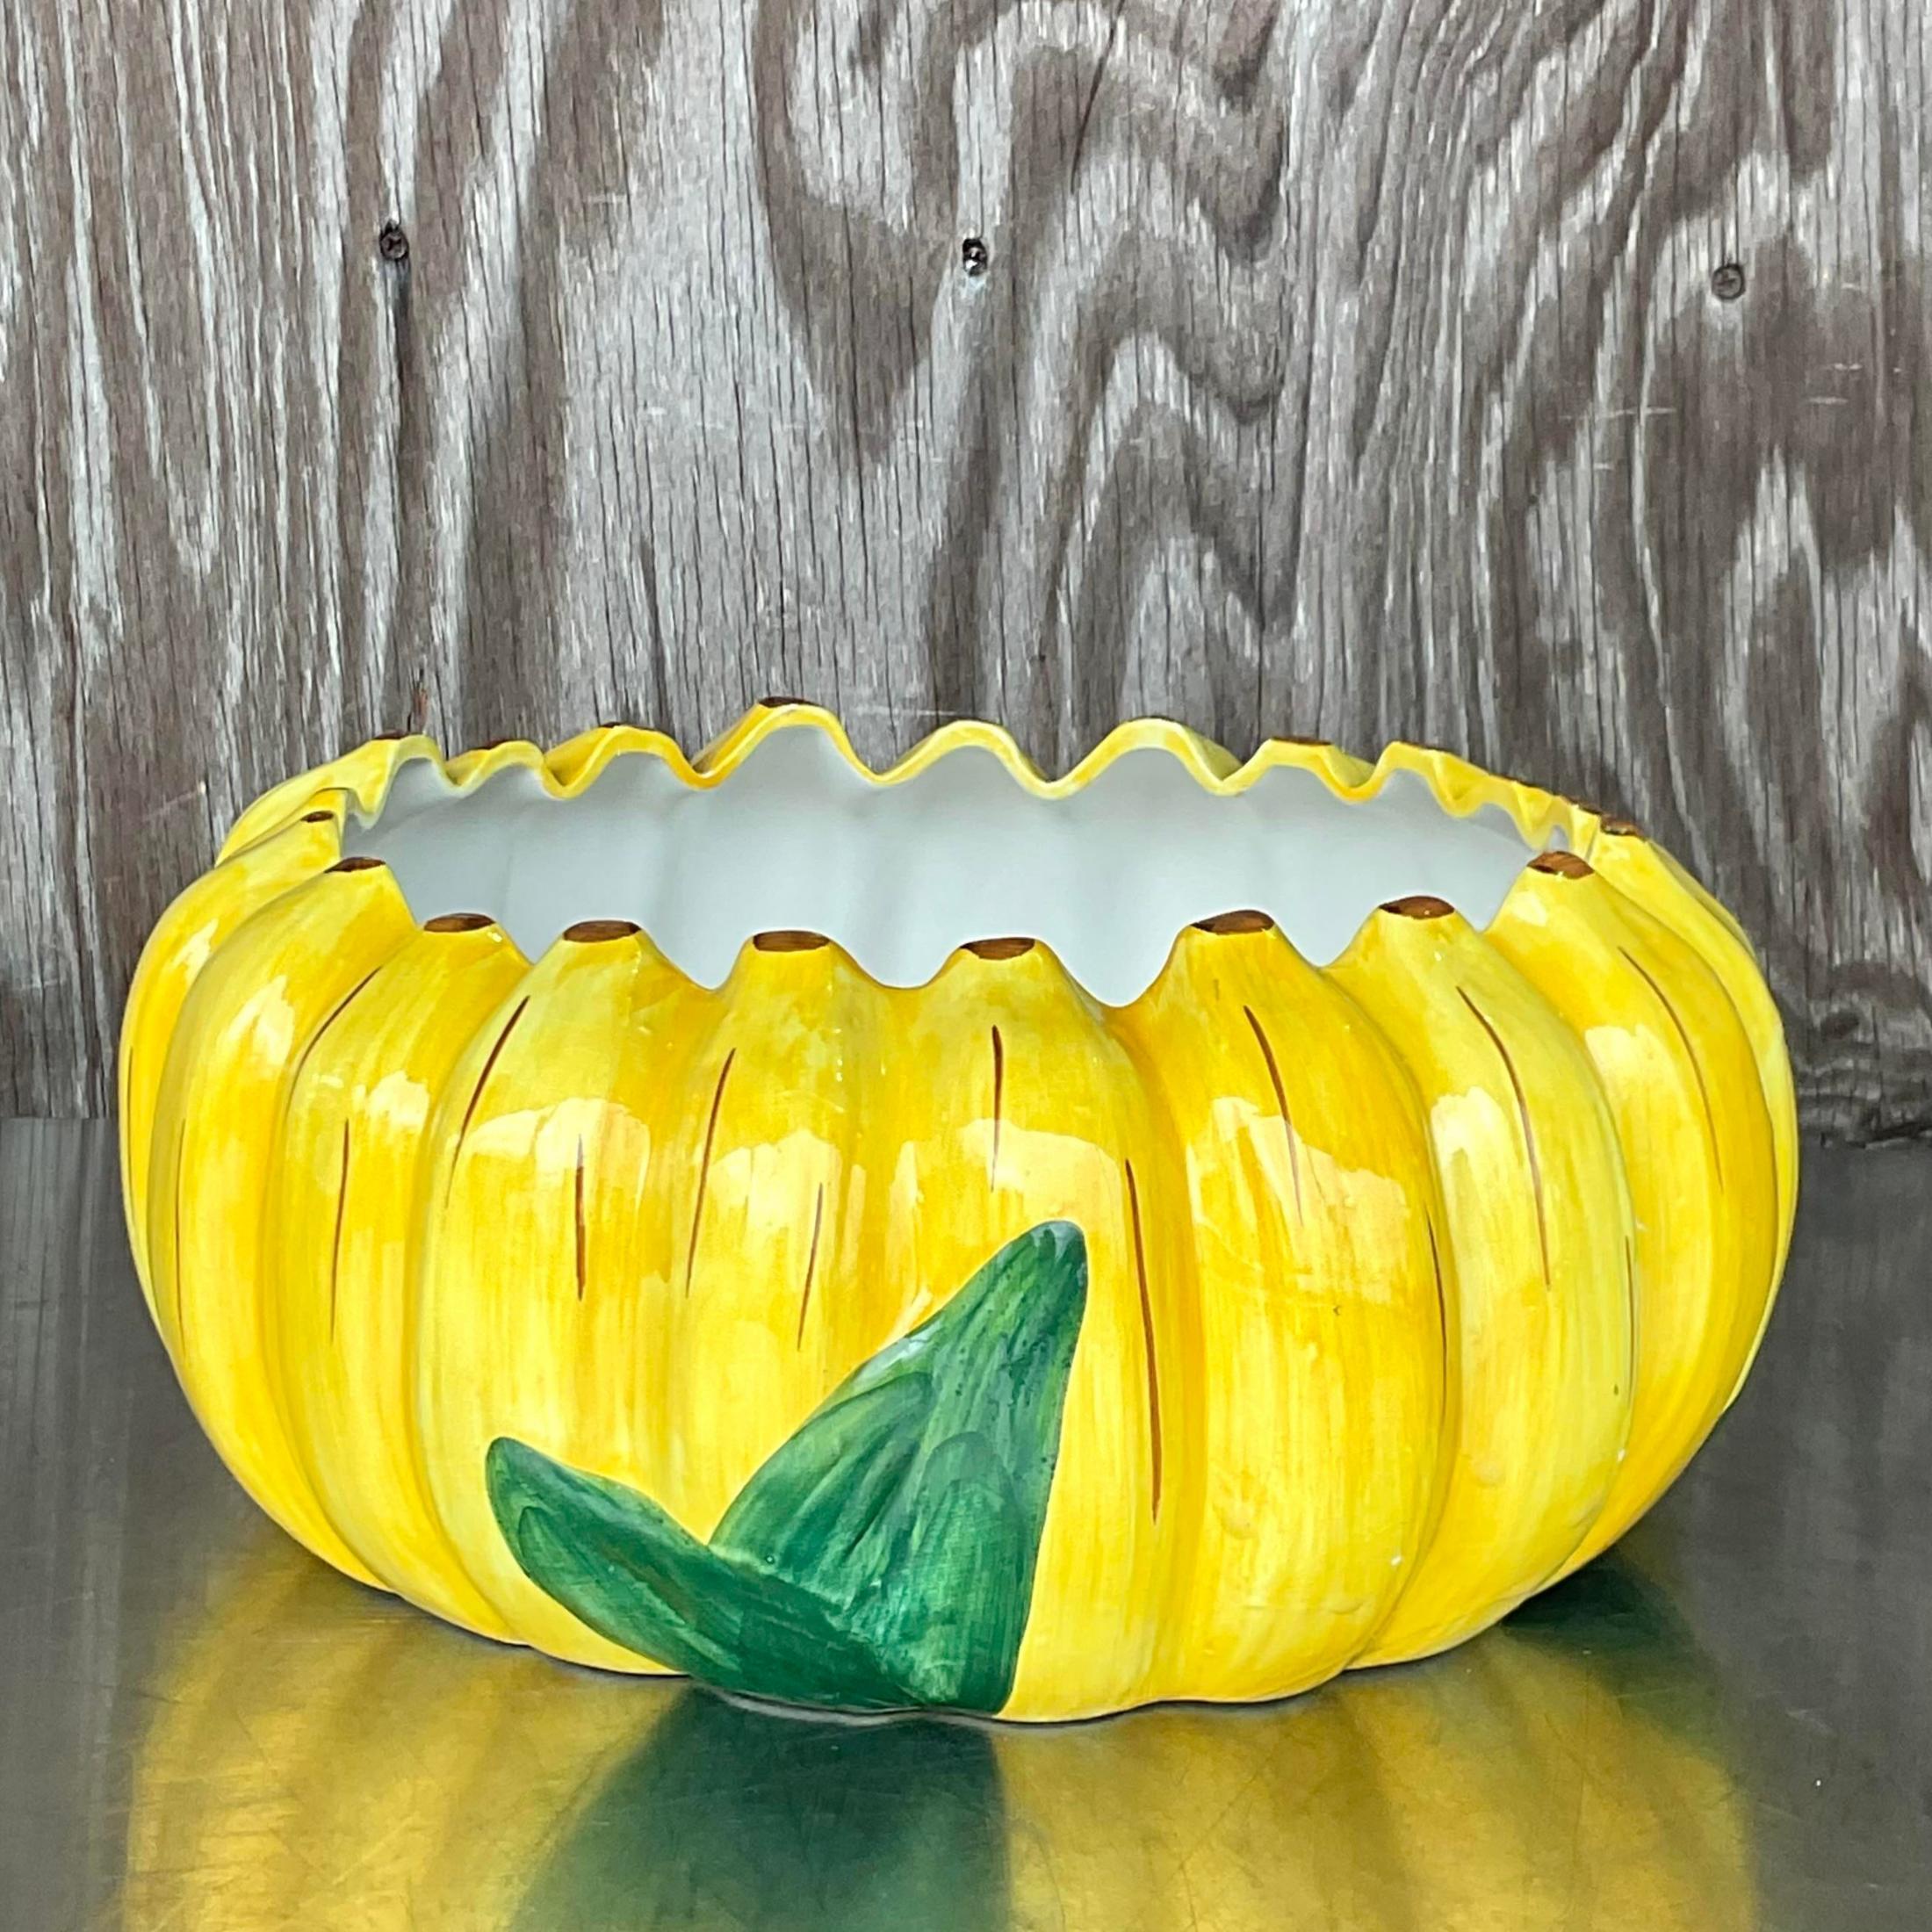 A fabulous vintage Boho centerpiece bowl. A bright and cheerful ring of bananas. Hand made in Italy. Acquired from a Palm Beach estate.